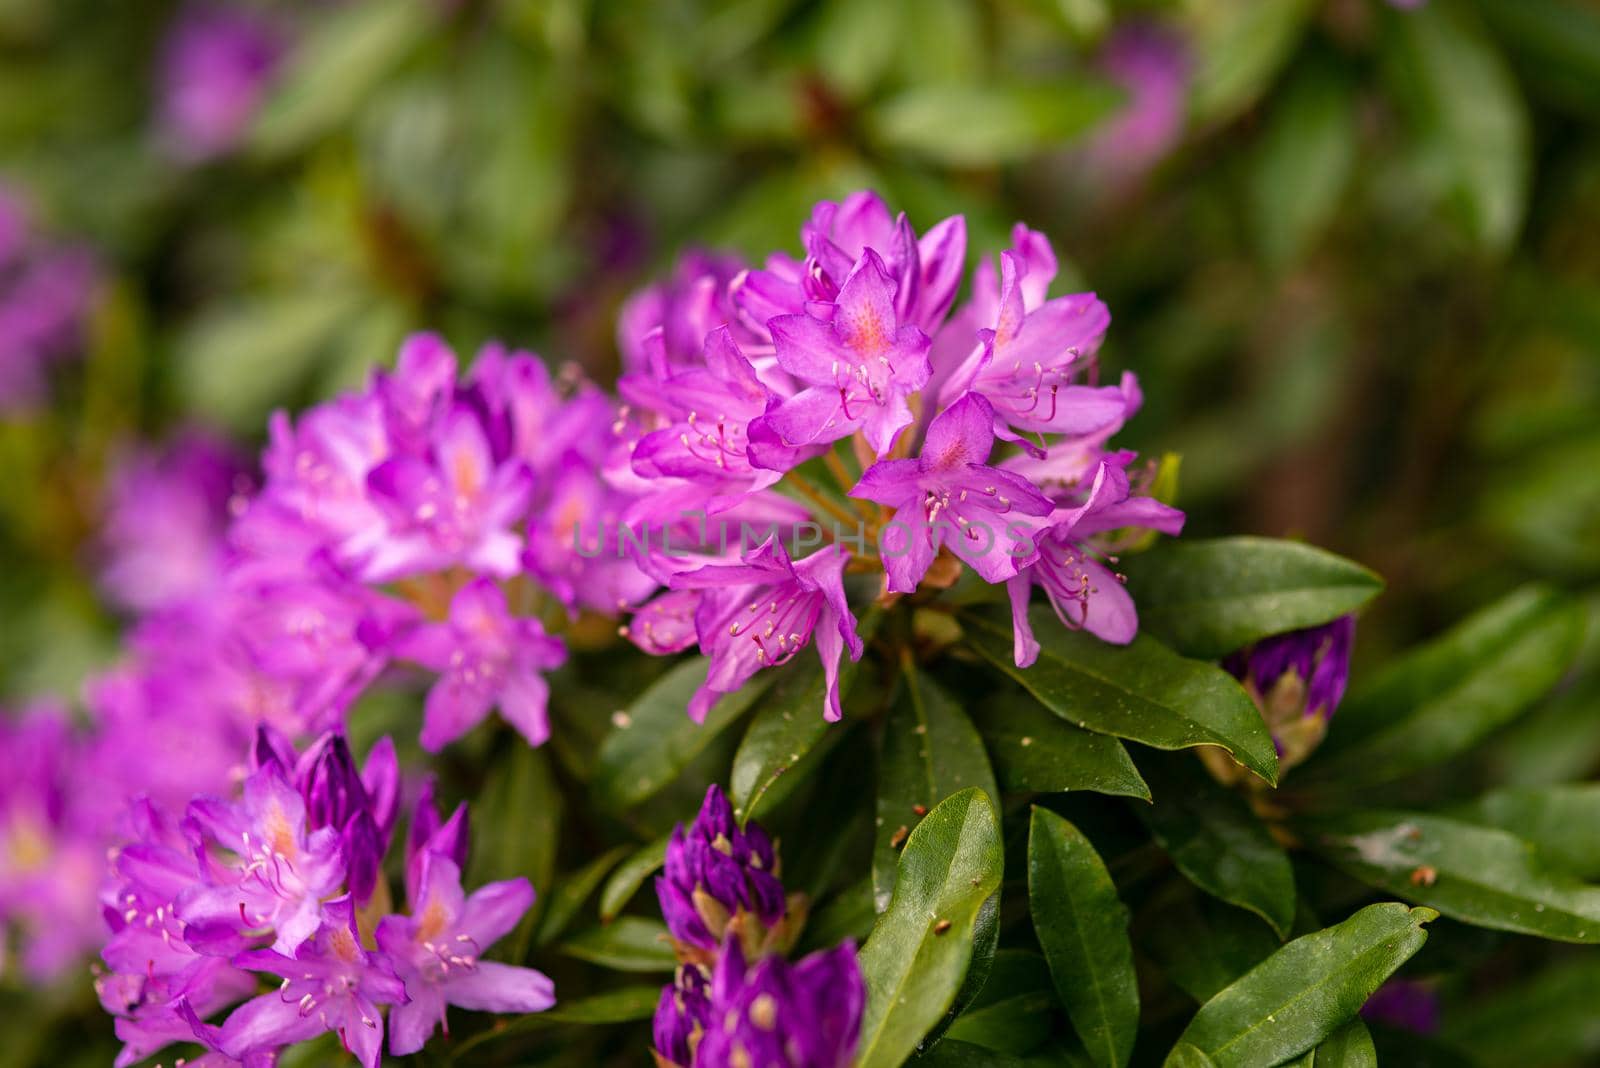 blooming purple buds of rhododendron in the spring garden